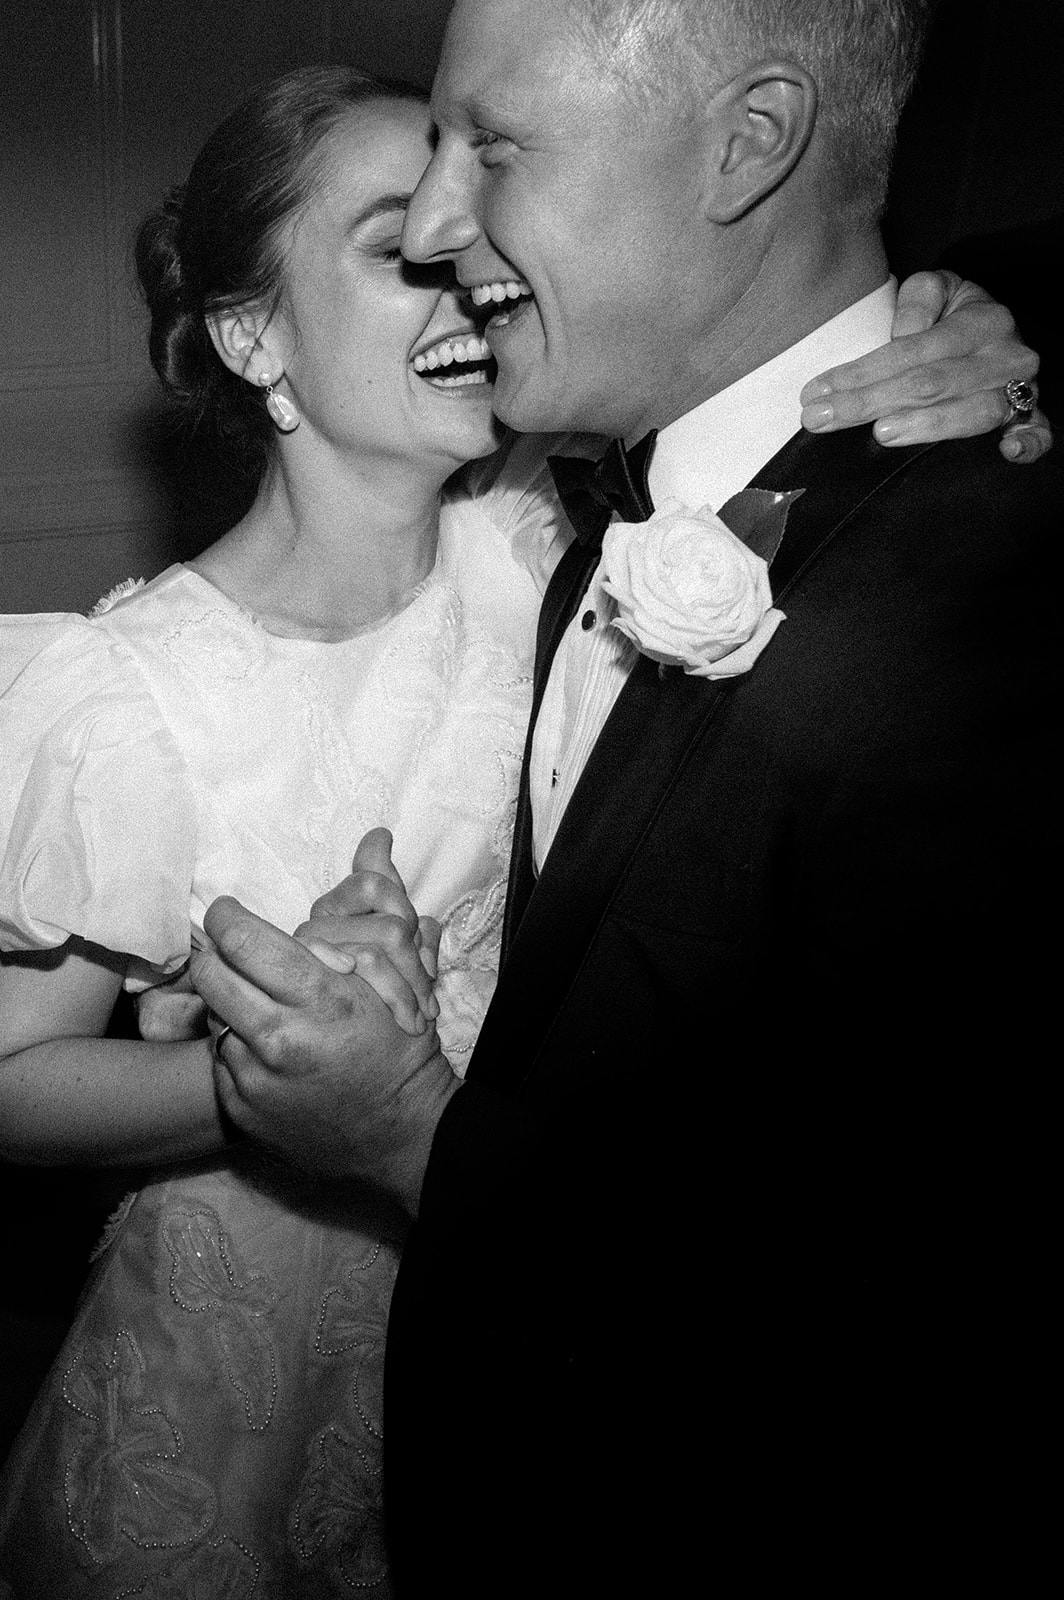 A black-and-white photo of a couple dancing and laughing joyfully. The woman wears a white dress with puffed sleeves, and the man is in a black suit with a bow tie and a rose on the lapel. They are holding hands, with their faces close together, sharing a happy moment.